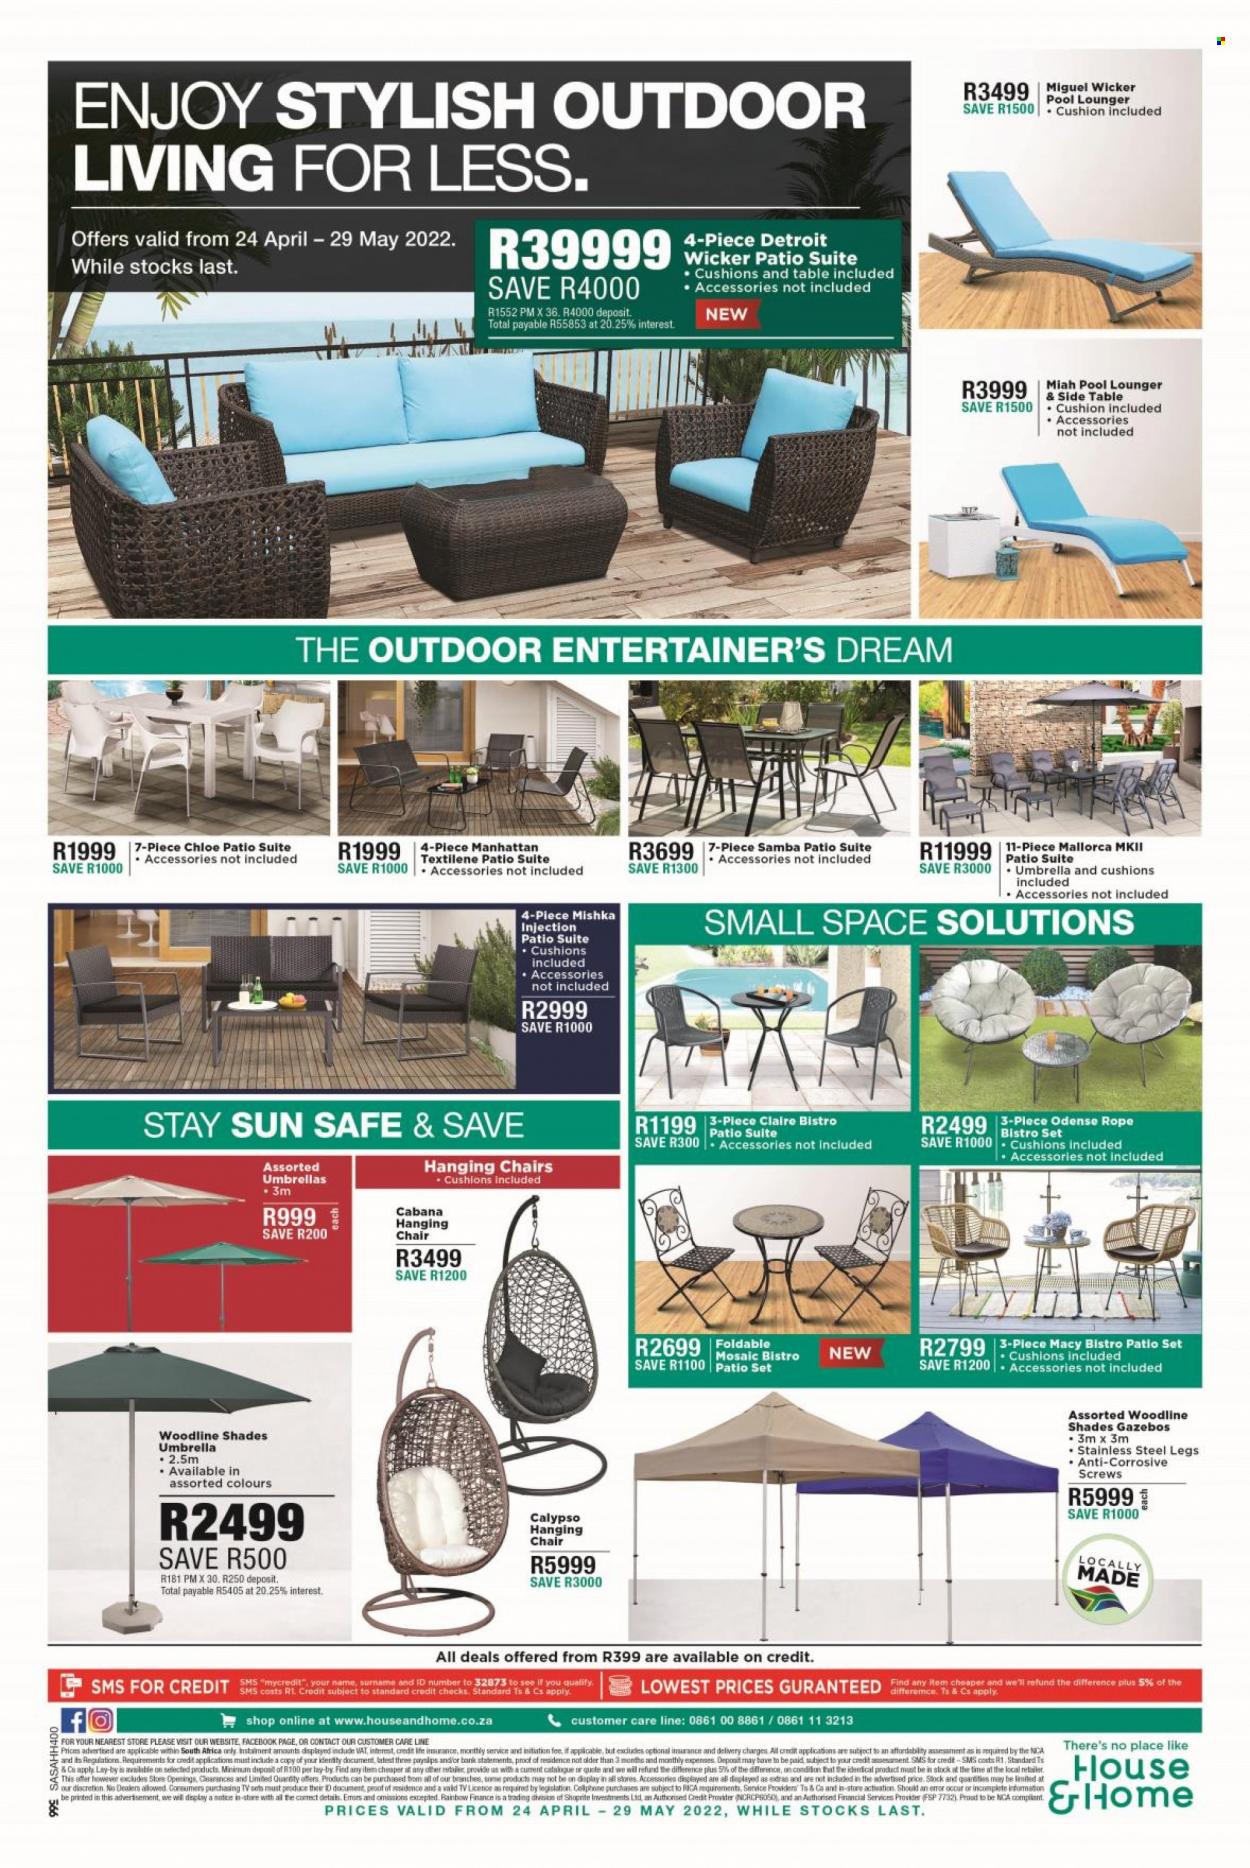 House & Home Specials  - 04.24.2022 - 05.29.2022. Page 1.